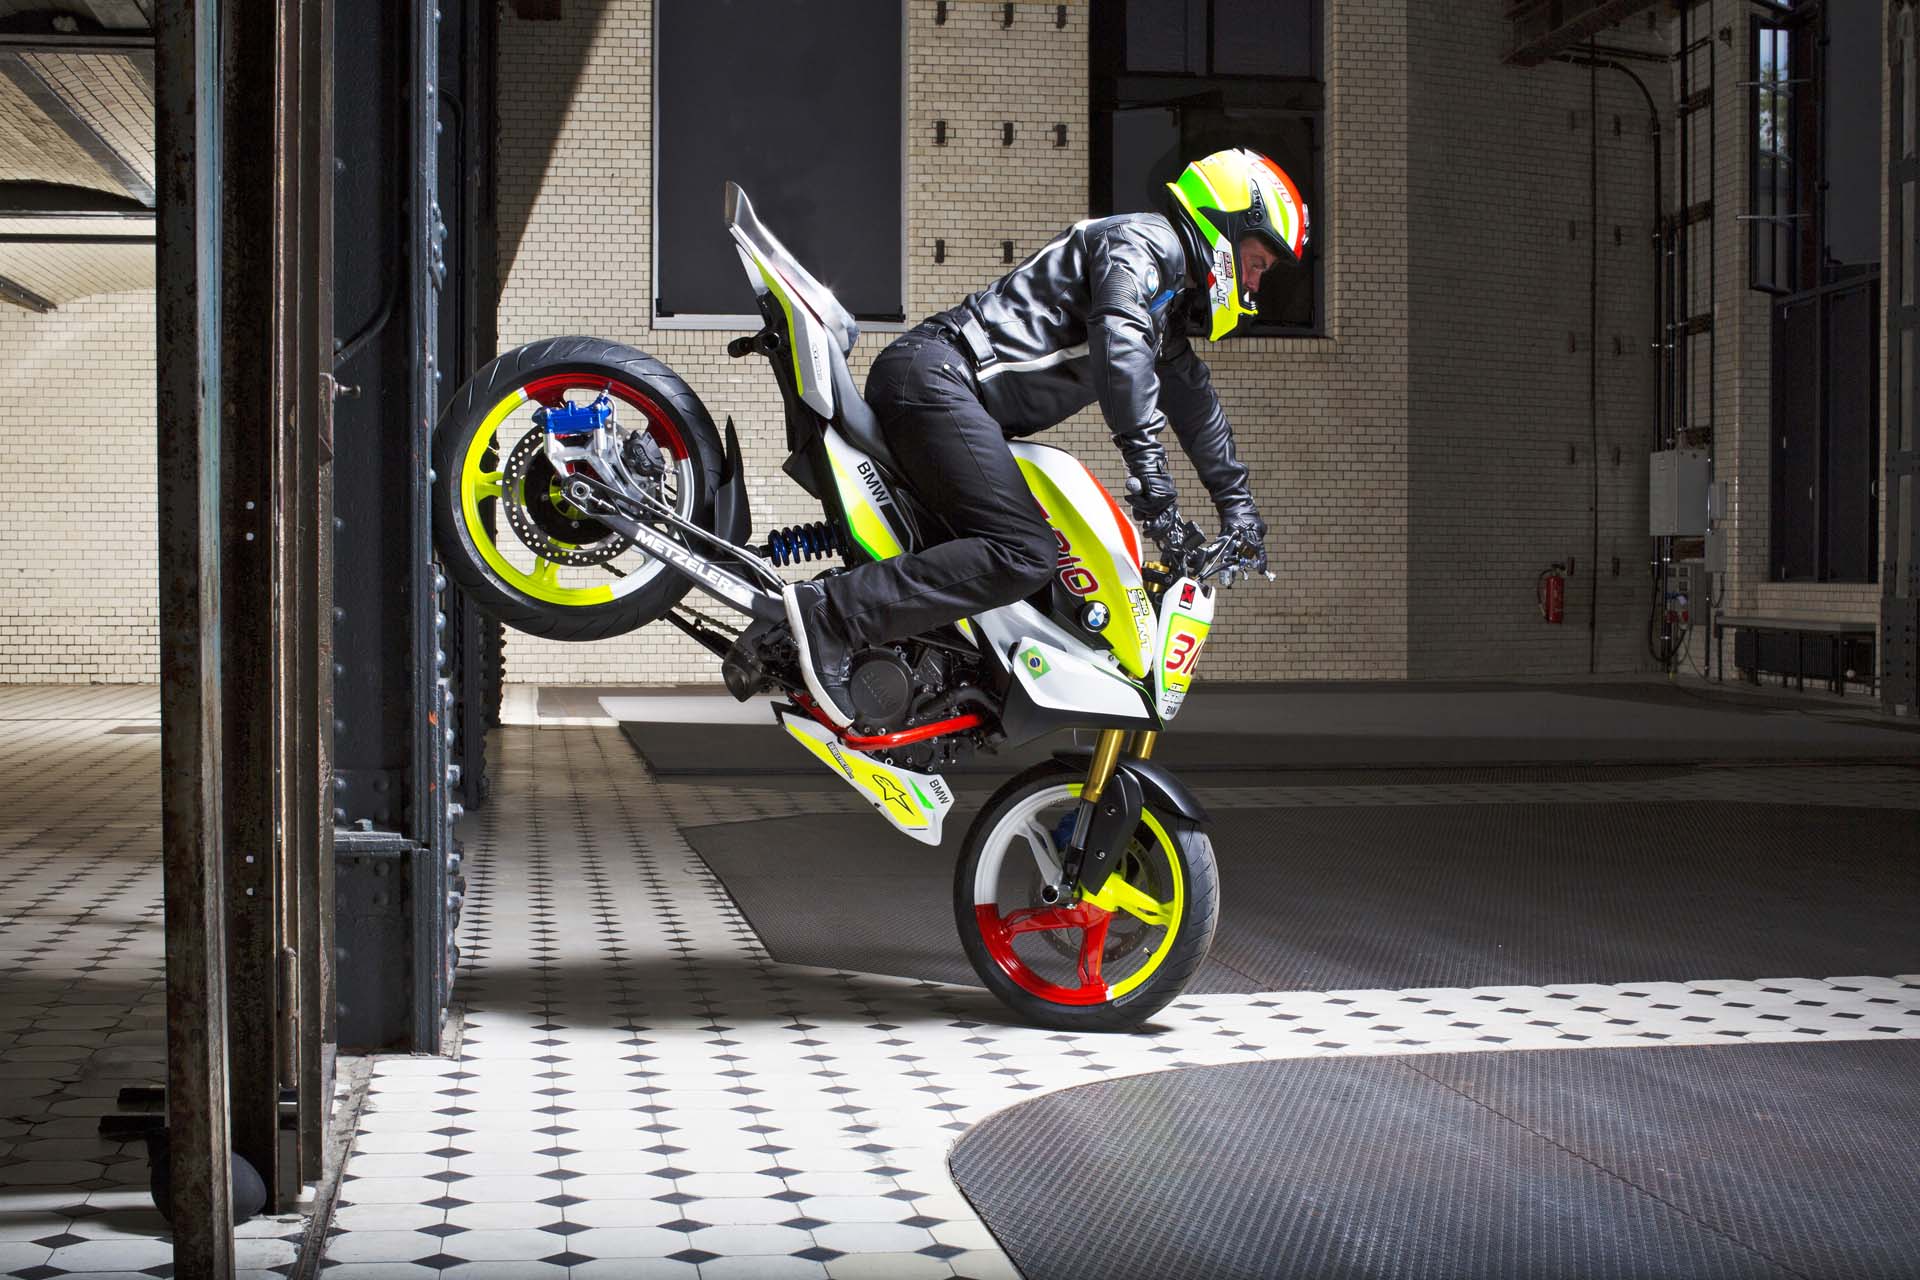 There are more than a few people who’ve been waiting for BMW to join the small-bike class. The G 310 R is their answer. The 313 cc single is good for 34 hp at 9,500 rpm and 21 lb-ft of torque at 7,500 all pushing a 159 kg (dry) chassis. It has ABS and inverted forks, so it looks the goods. Like ‘em weird? This one has its intake in the front and exhaust out the back of the cylinder head. The bike pictured is a stunt concept produced to promote the 310.